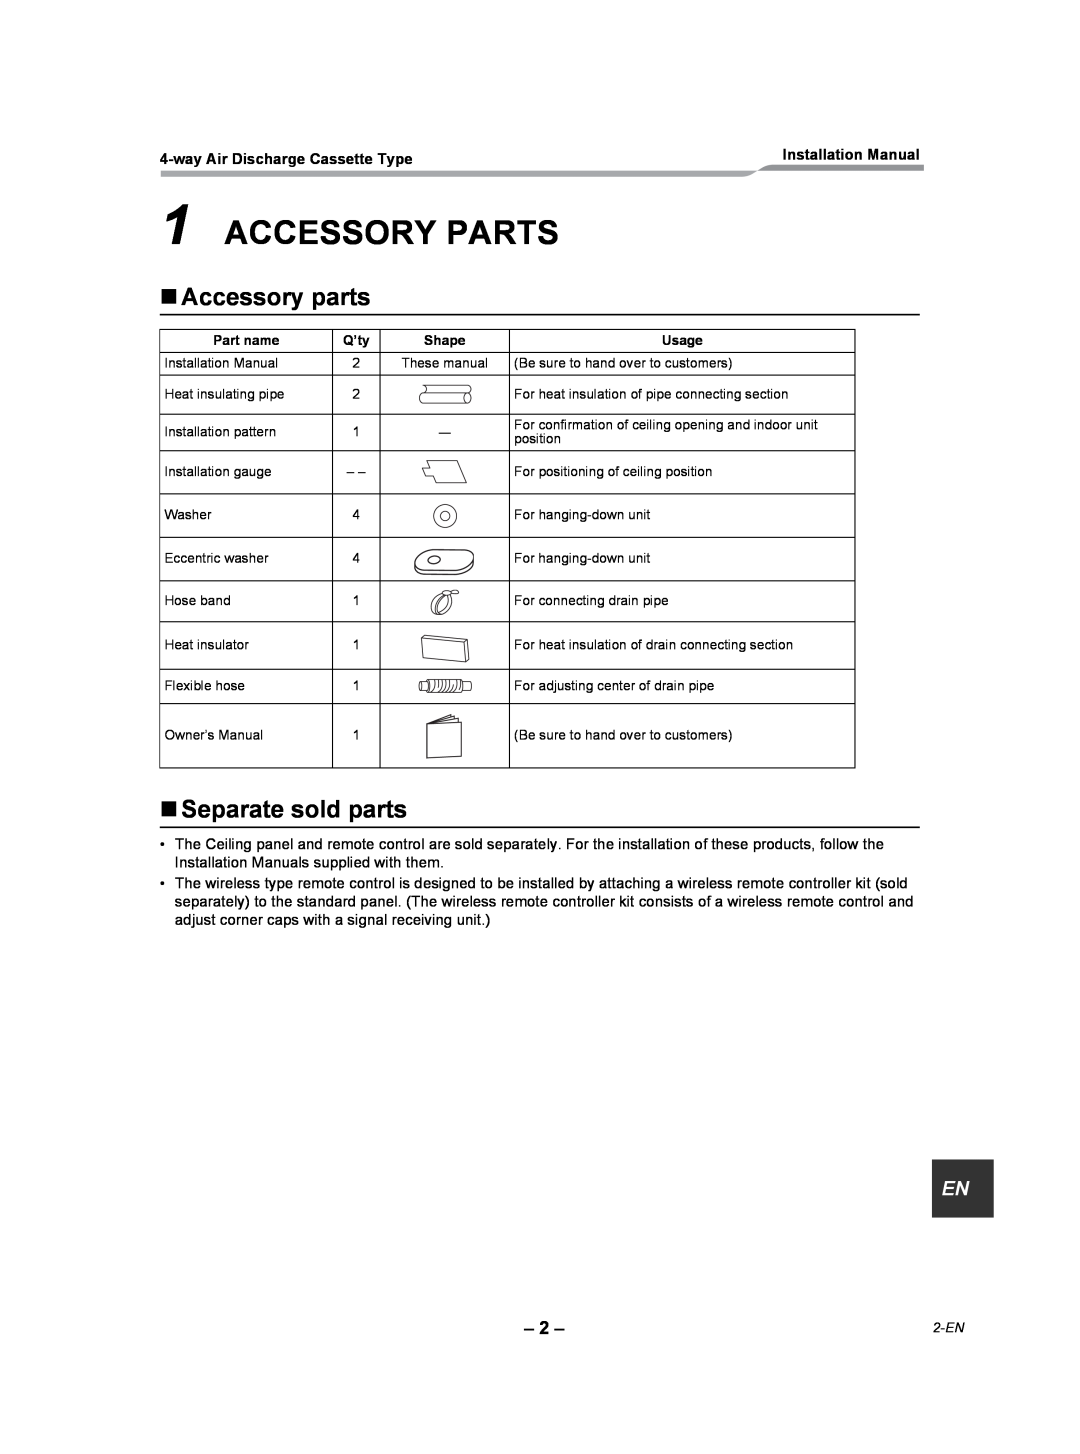 Toshiba RAV-SP180UT-UL Accessory Parts, „Accessory parts, „Separate sold parts, wayAir Discharge Cassette Type 